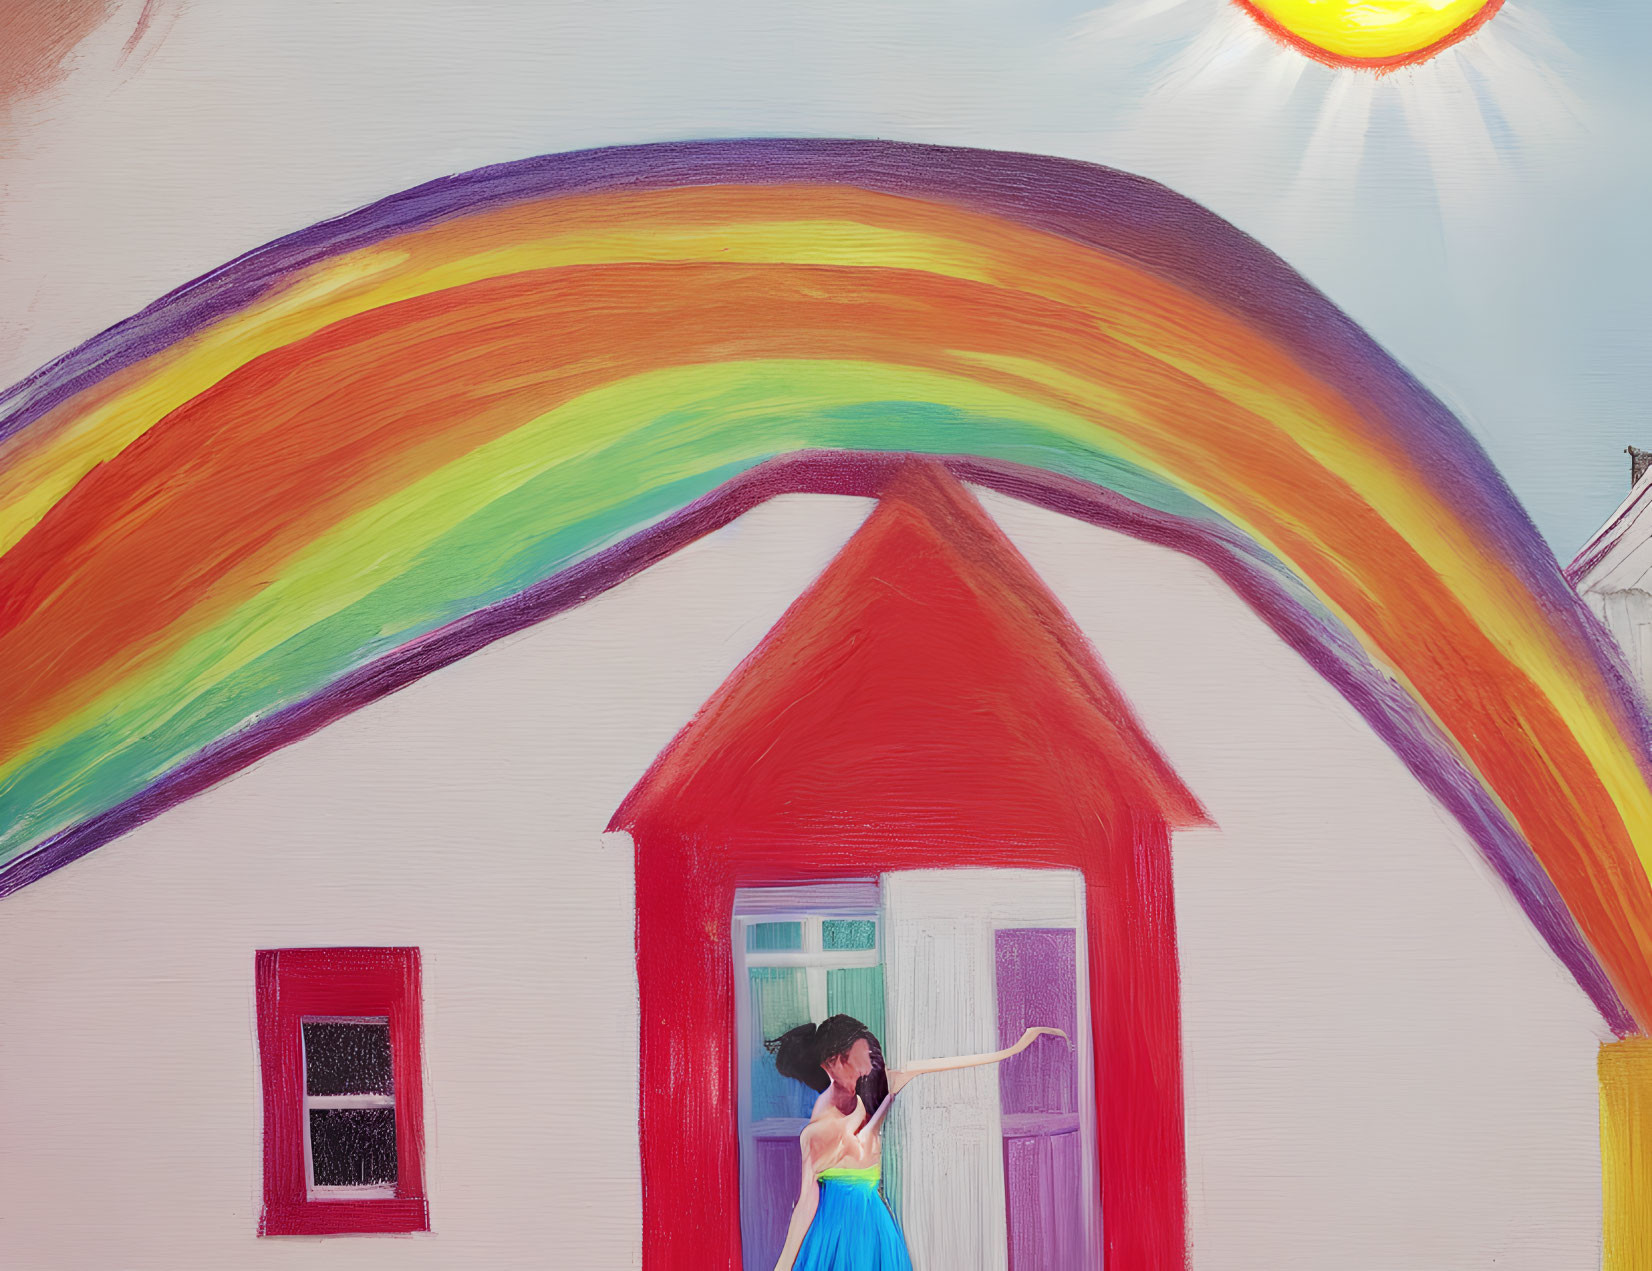 Colorful Painting of Girl Opening Door to Red House with Rainbow and Sun